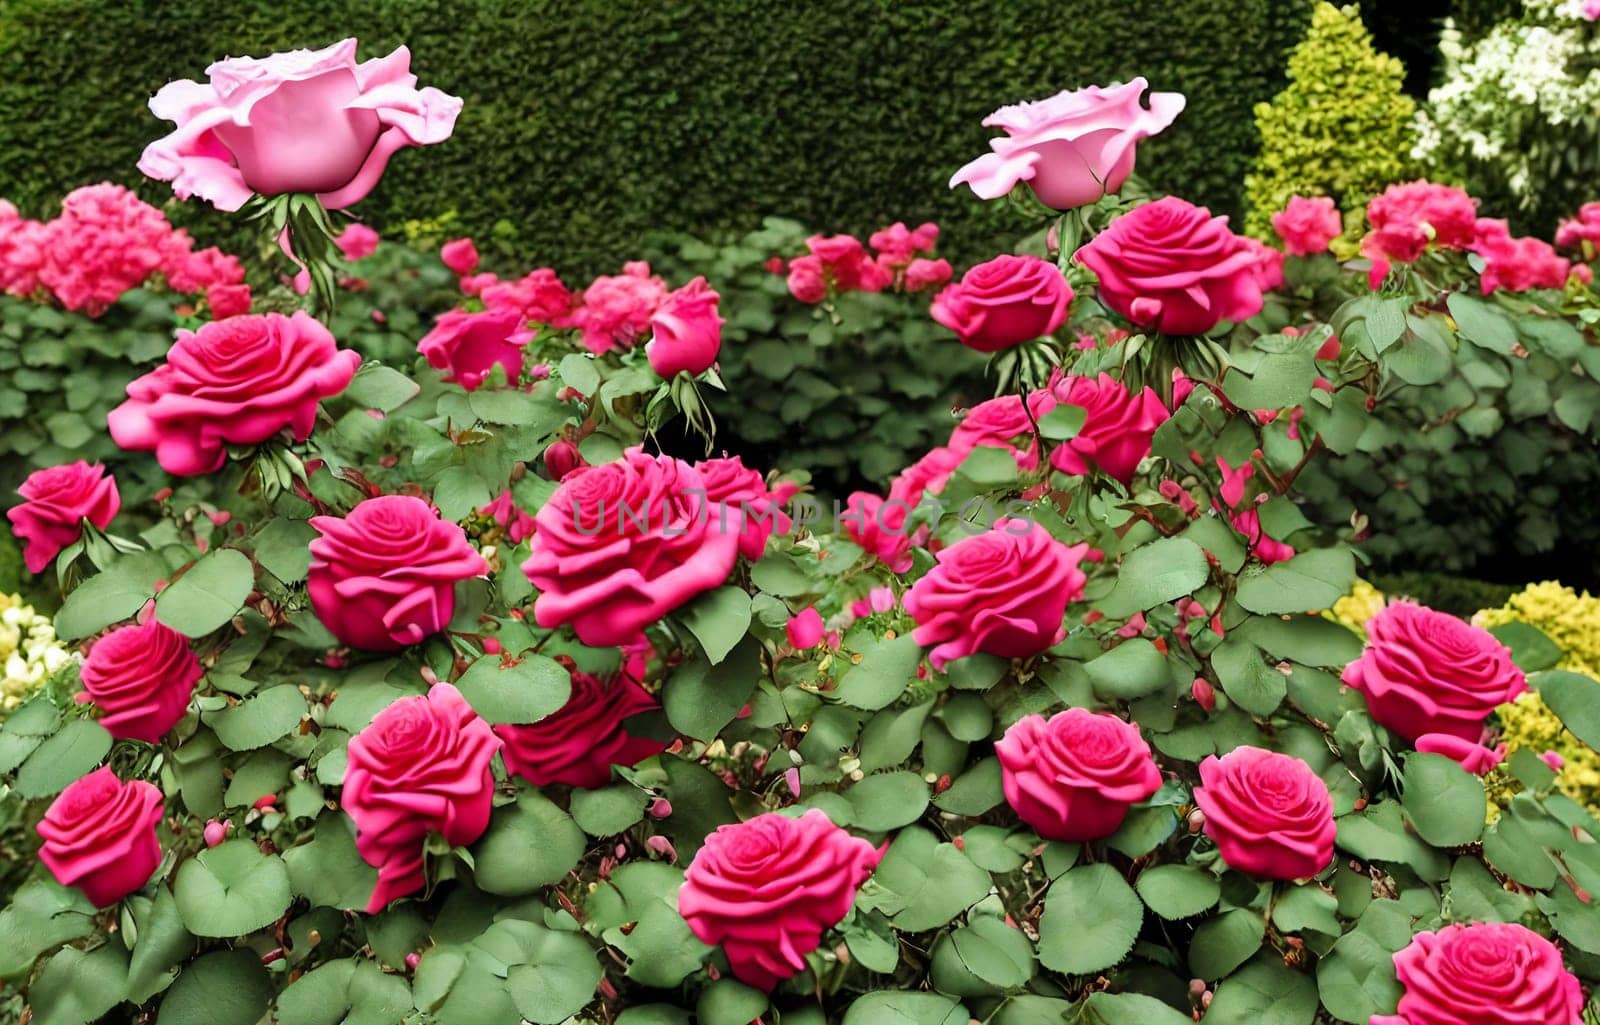 Timeless beauty of a classic rose garden in full bloom. Panorama by GoodOlga